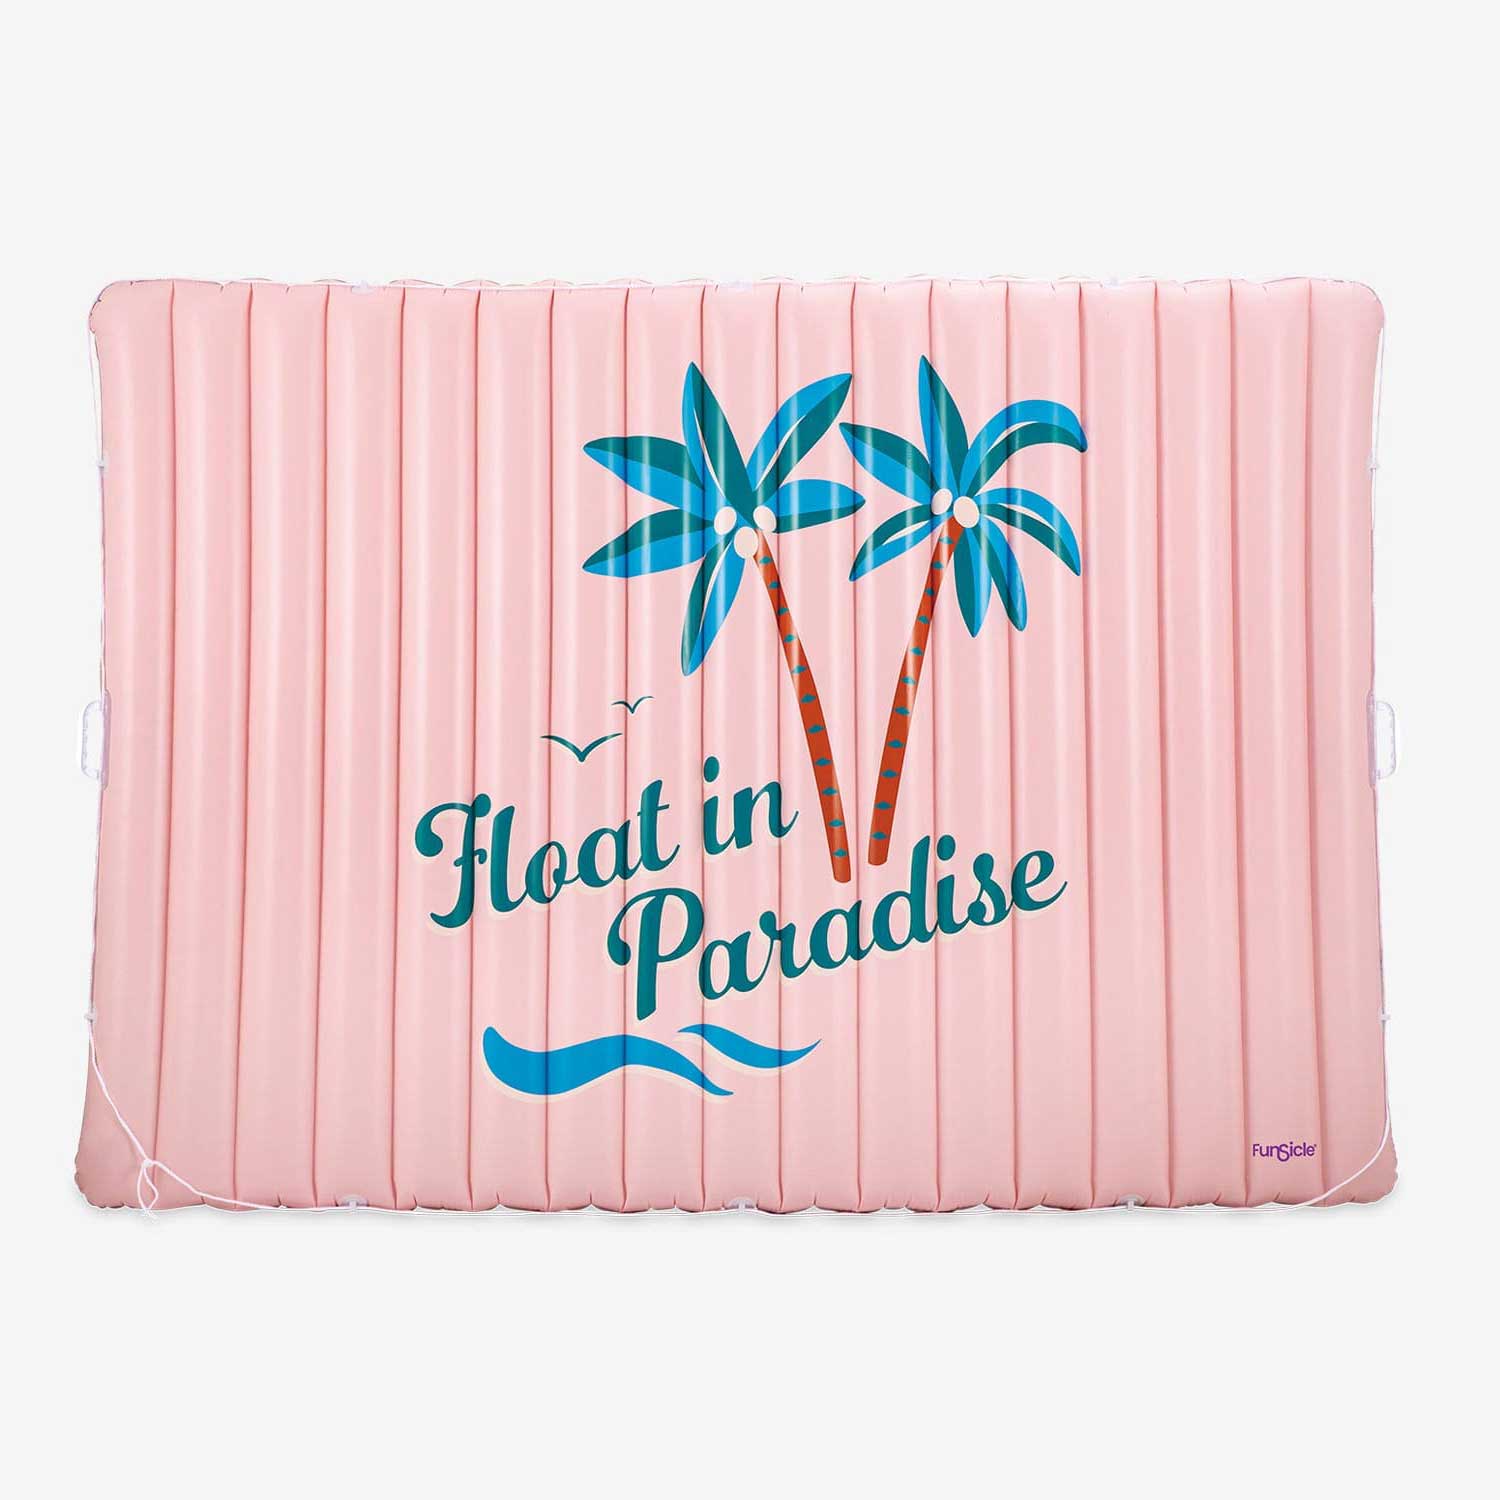 Funsicle Float in Paradise Mat front view